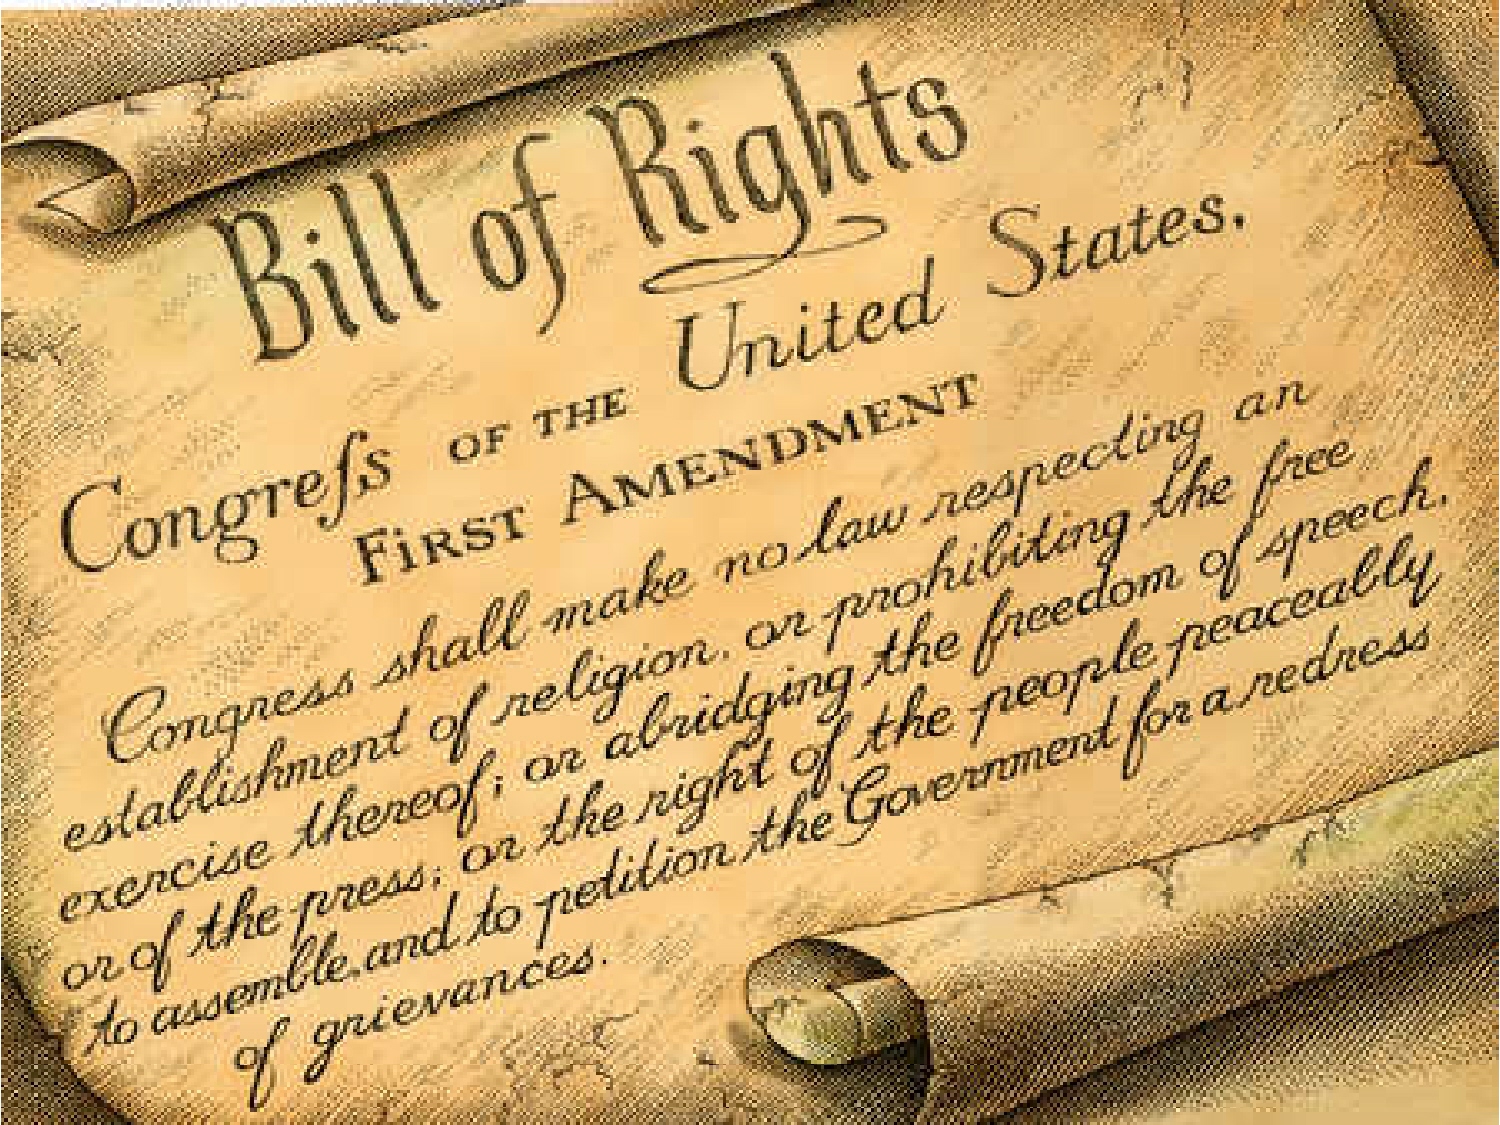 Bill of Rights Blank Meme Template